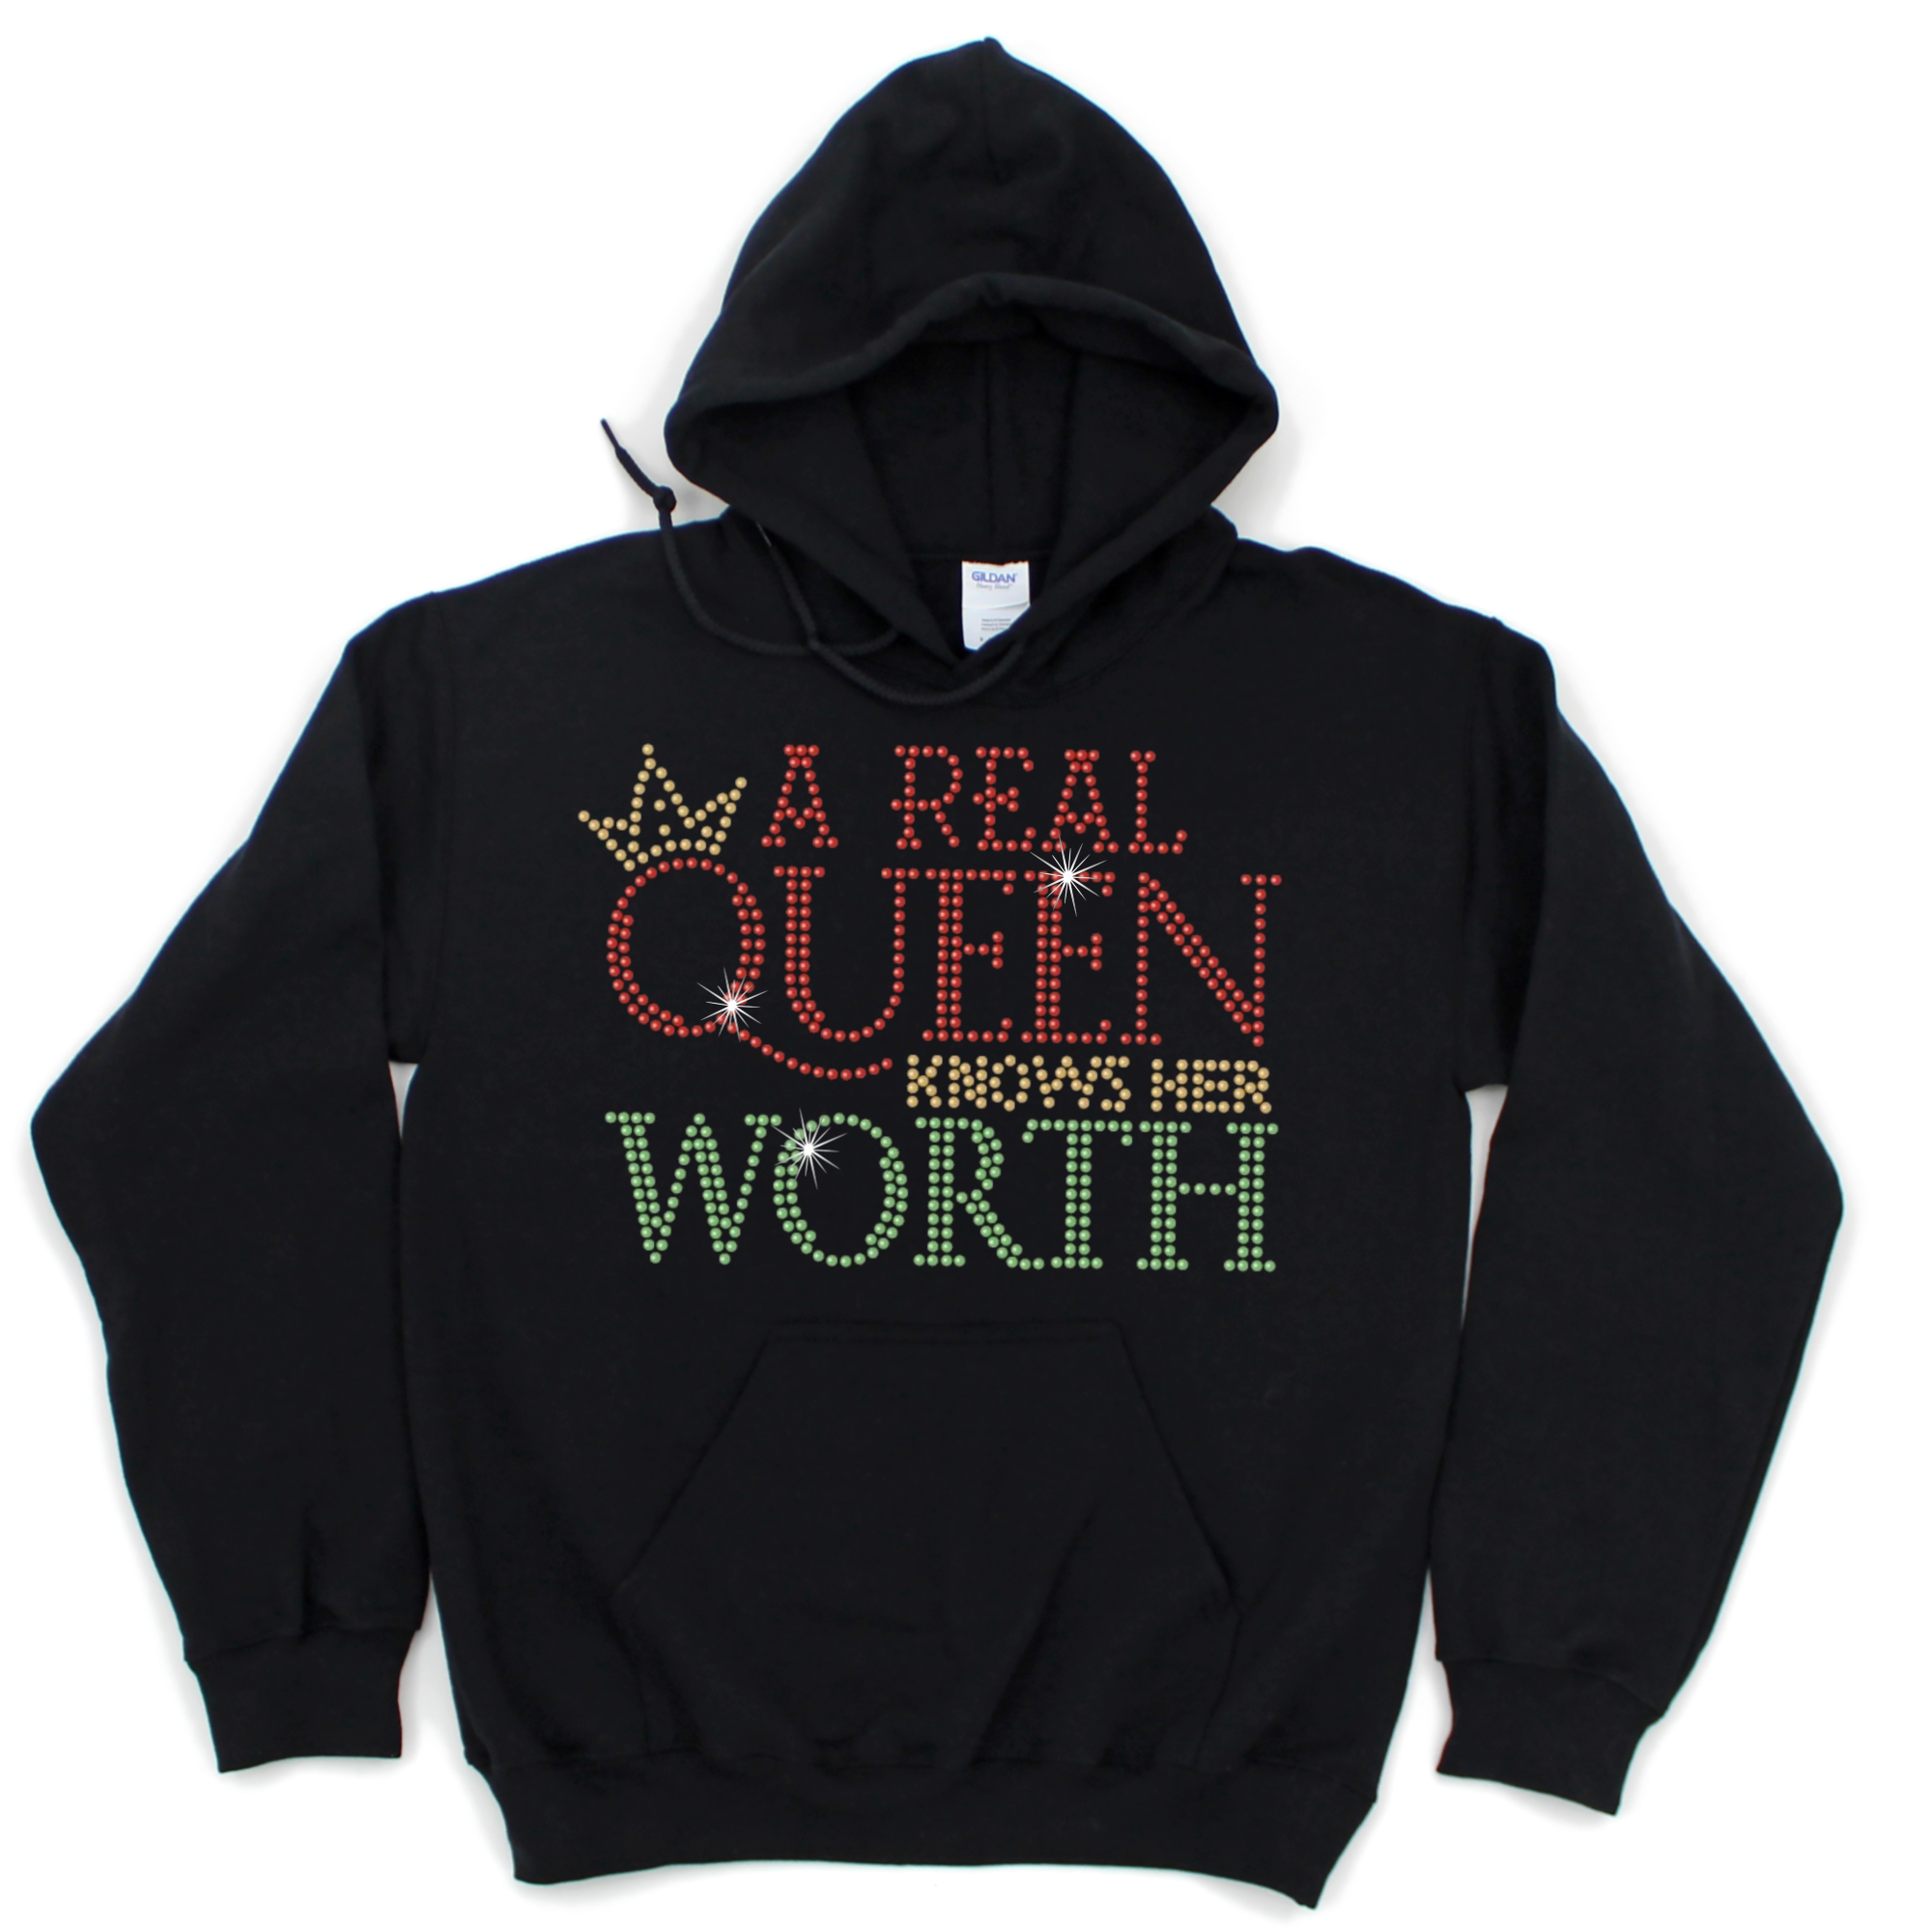 A Real Queen Knows Her Worth Rhinestone Hoodie